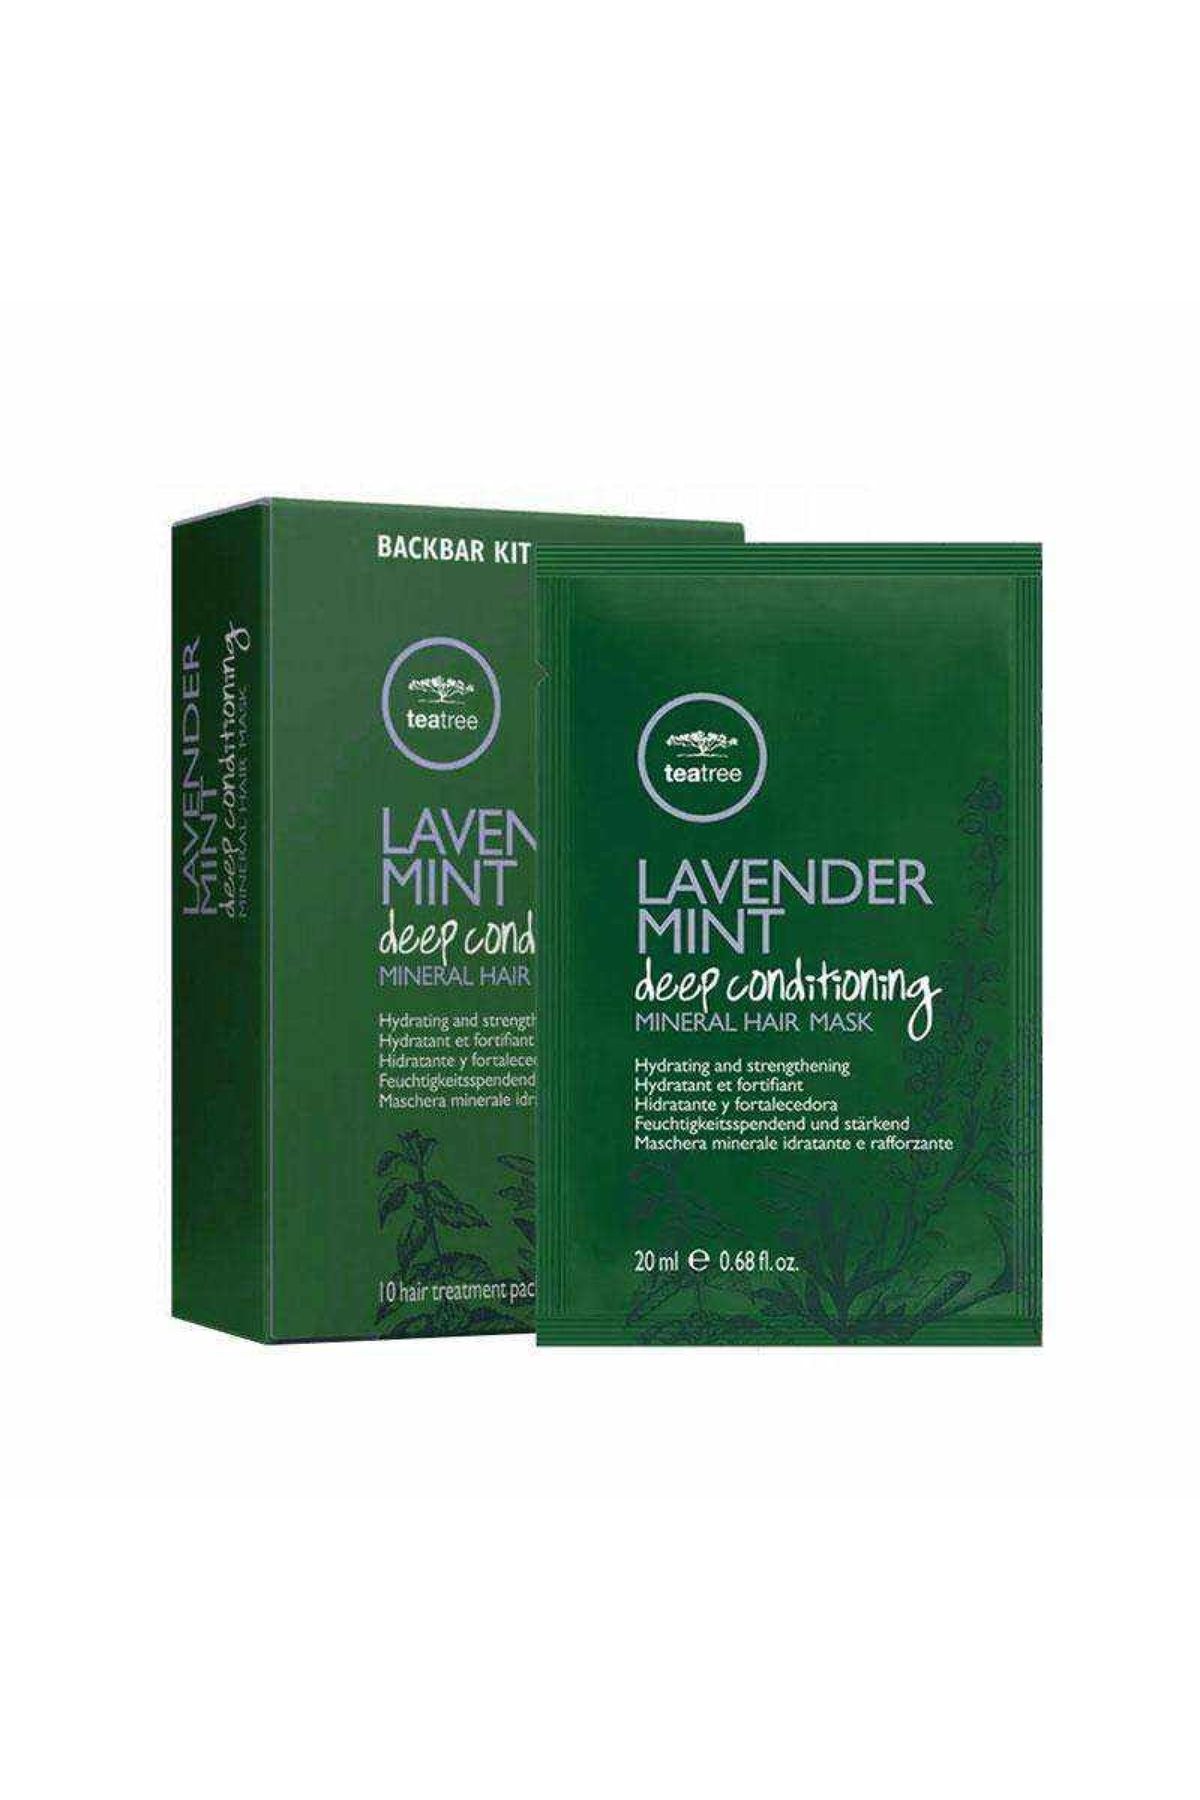 PAUL MITCHELL Lavender Mint Deep Conditioning Mineral Hair Mask 10x 20ml